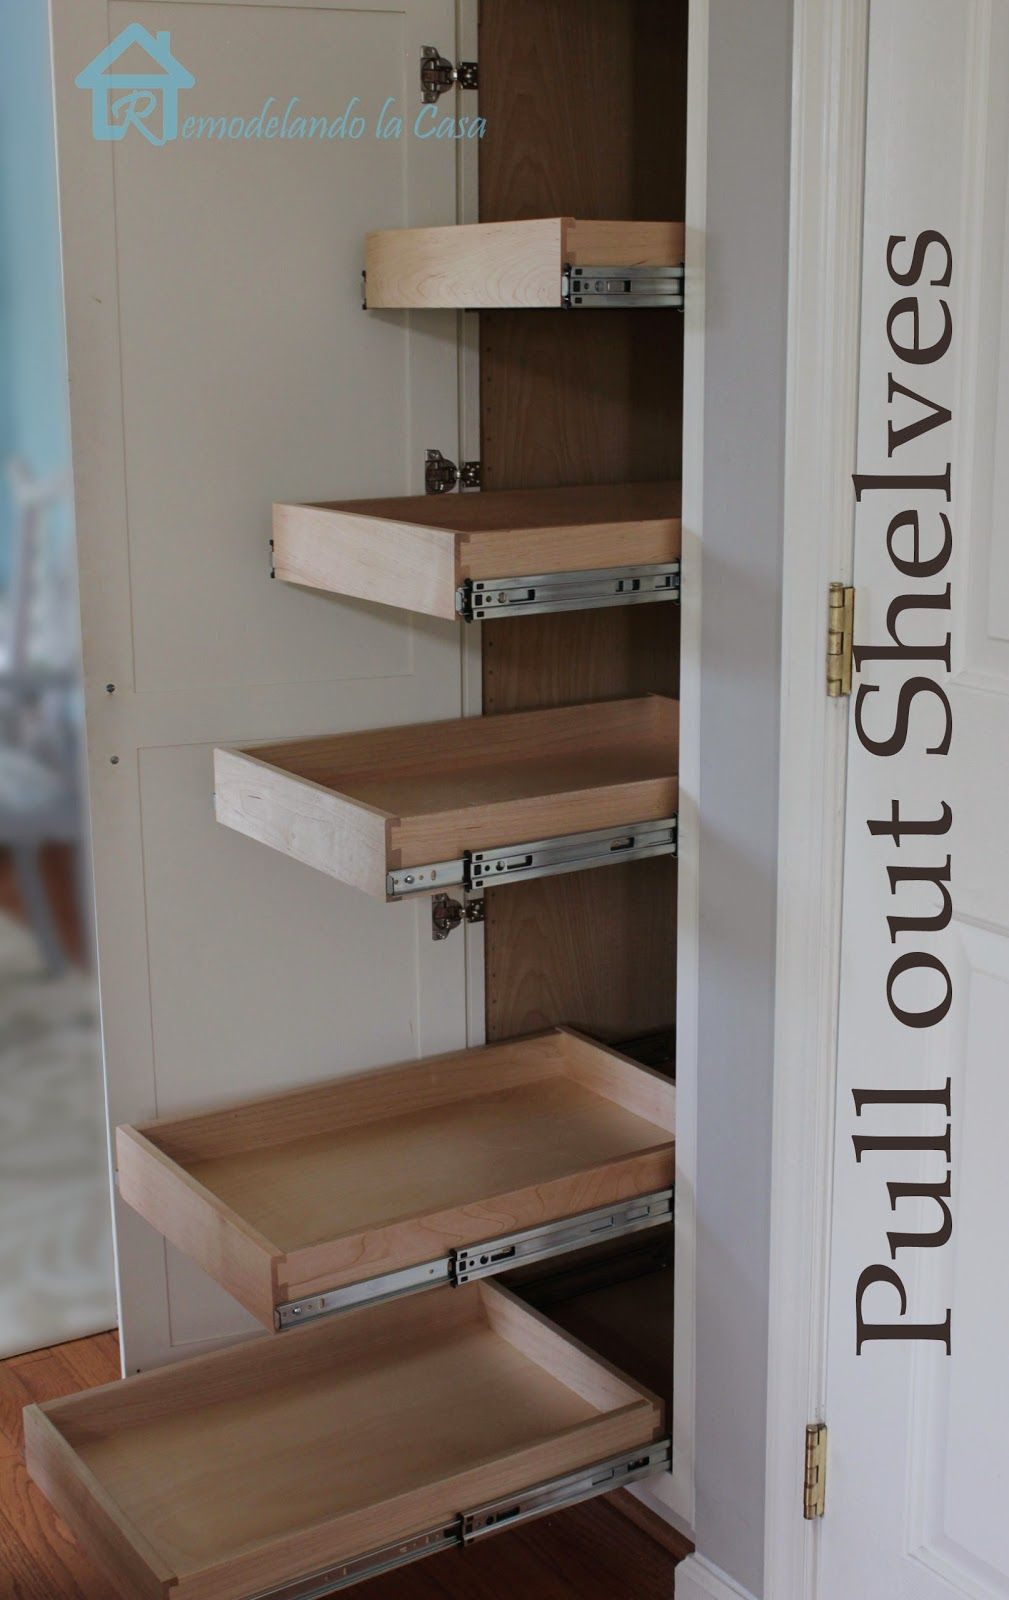 DIY Pull Out Cabinet Organizer
 Kitchen Organization Pull Out Shelves in Pantry